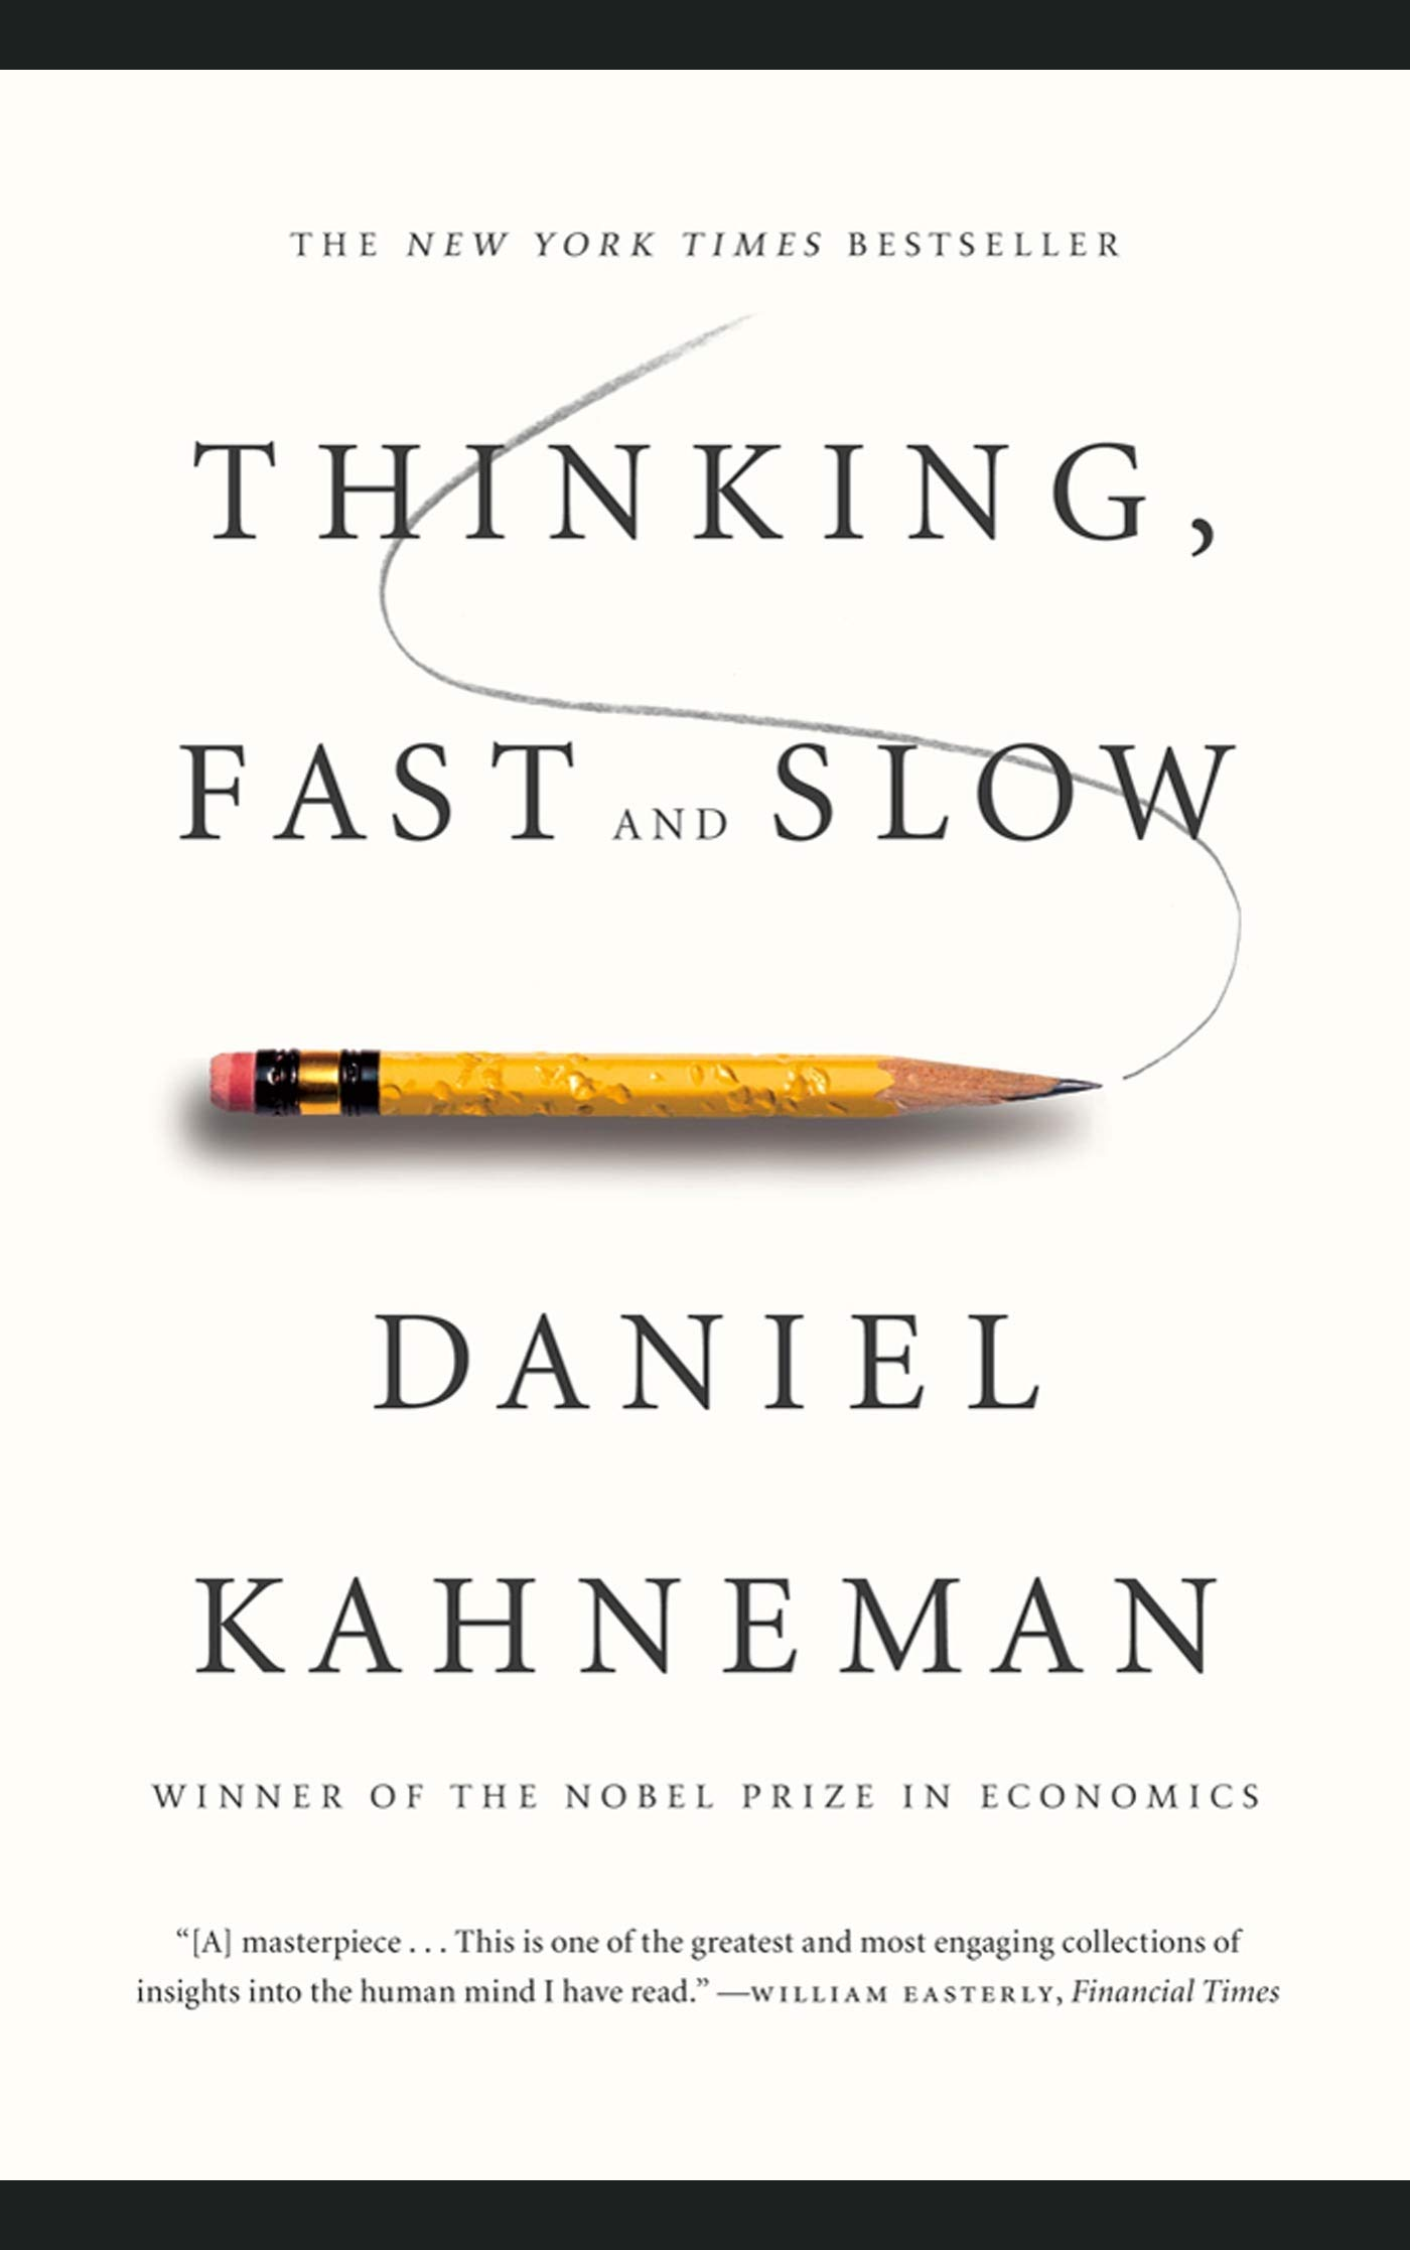 THINKING FAST AND SLOW by DANIEL KAHNEMAN